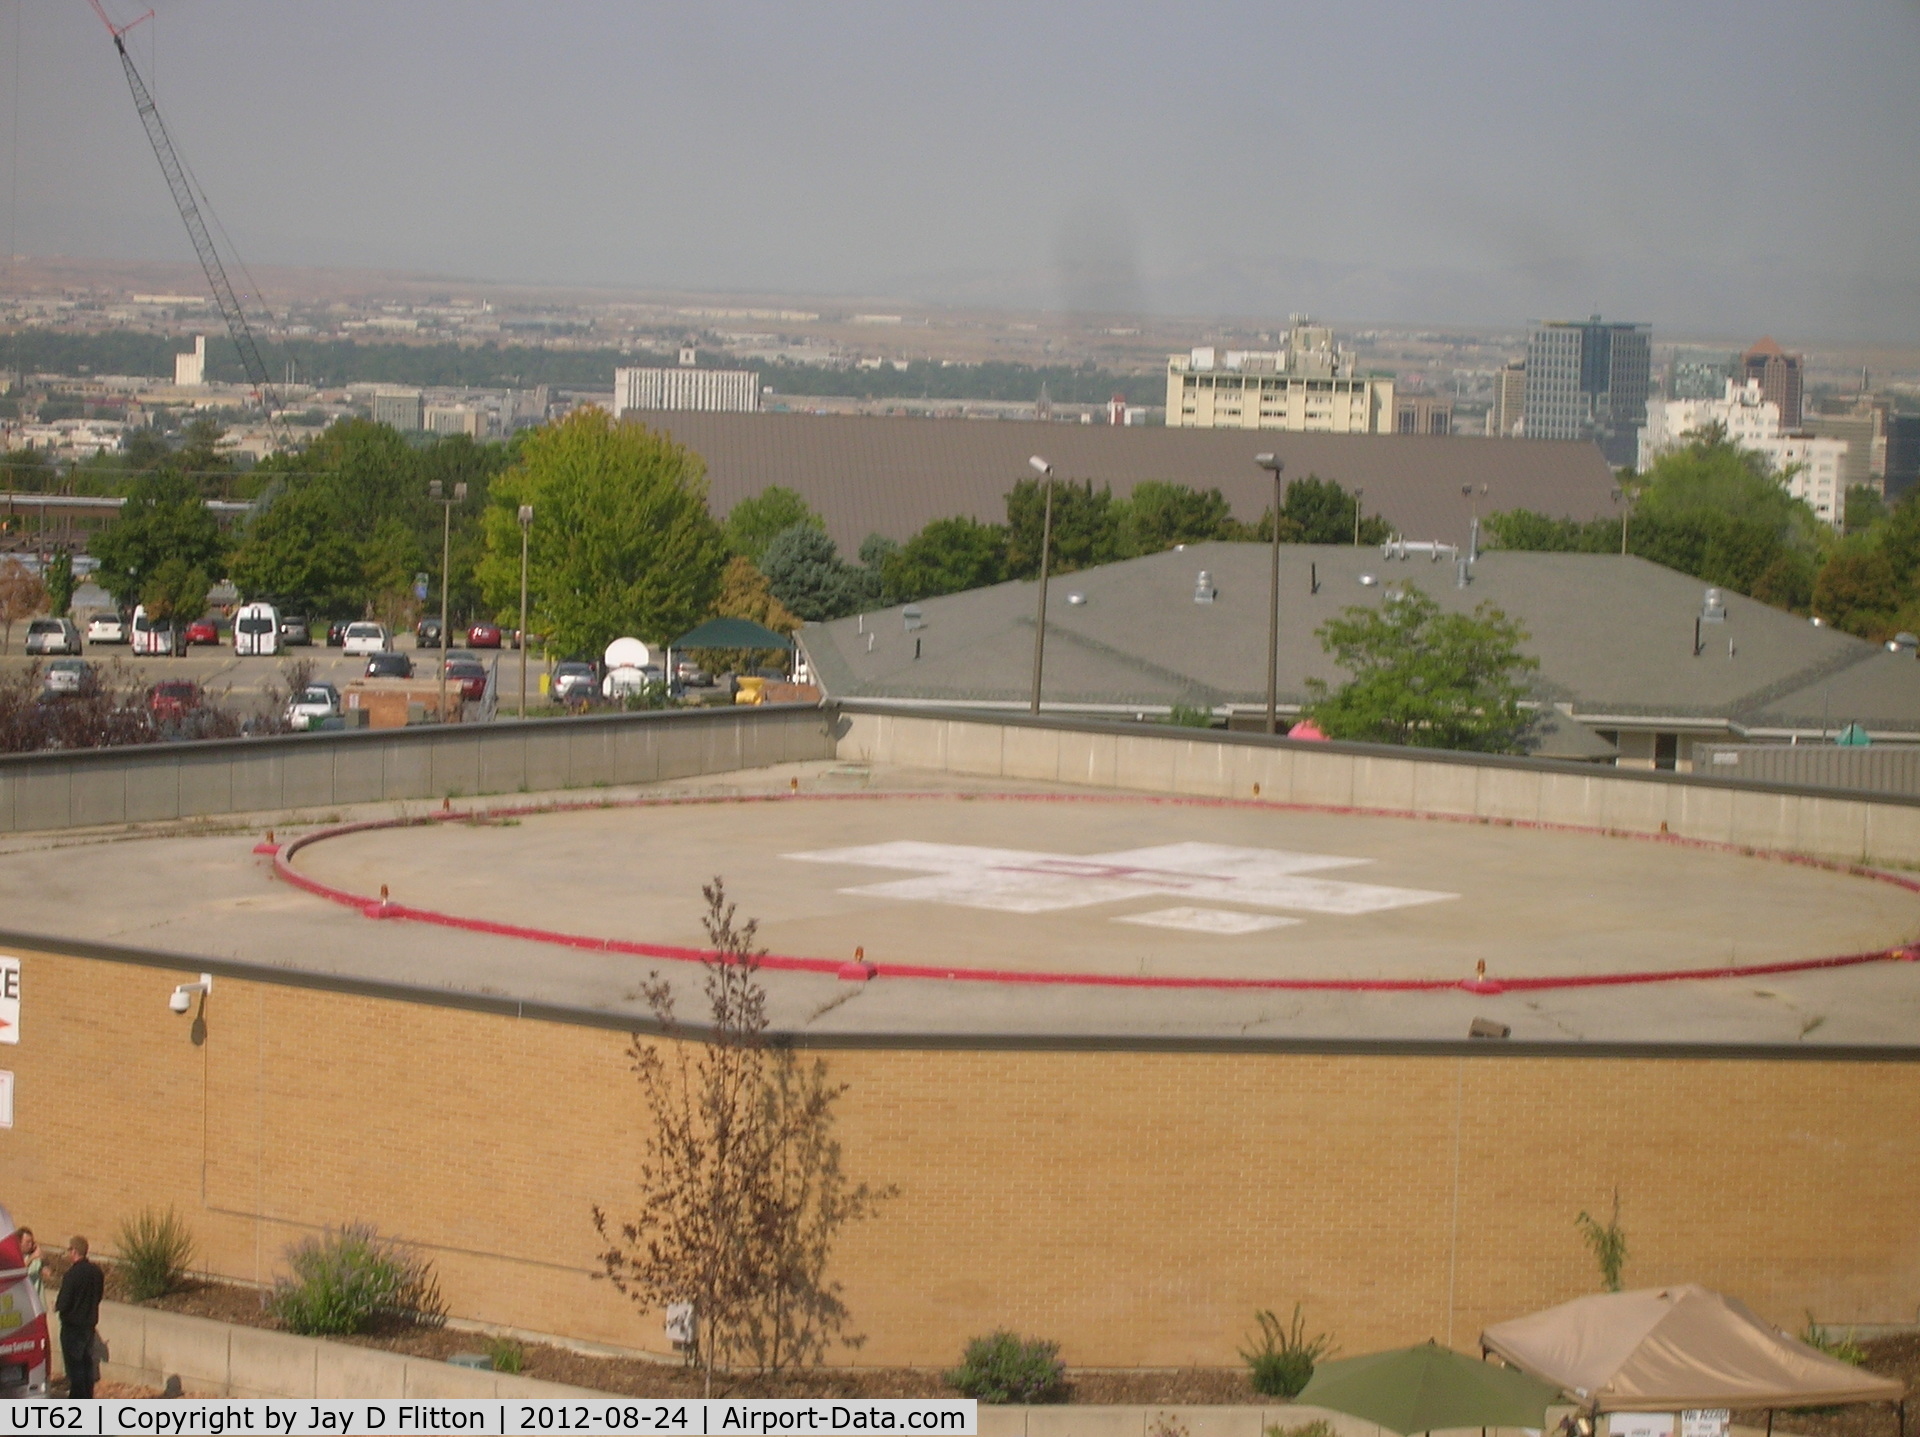 Department Of Veterans Affairs Heliport (UT62) - I have never seen a Helicopter land here, there sure are a lot of people around.